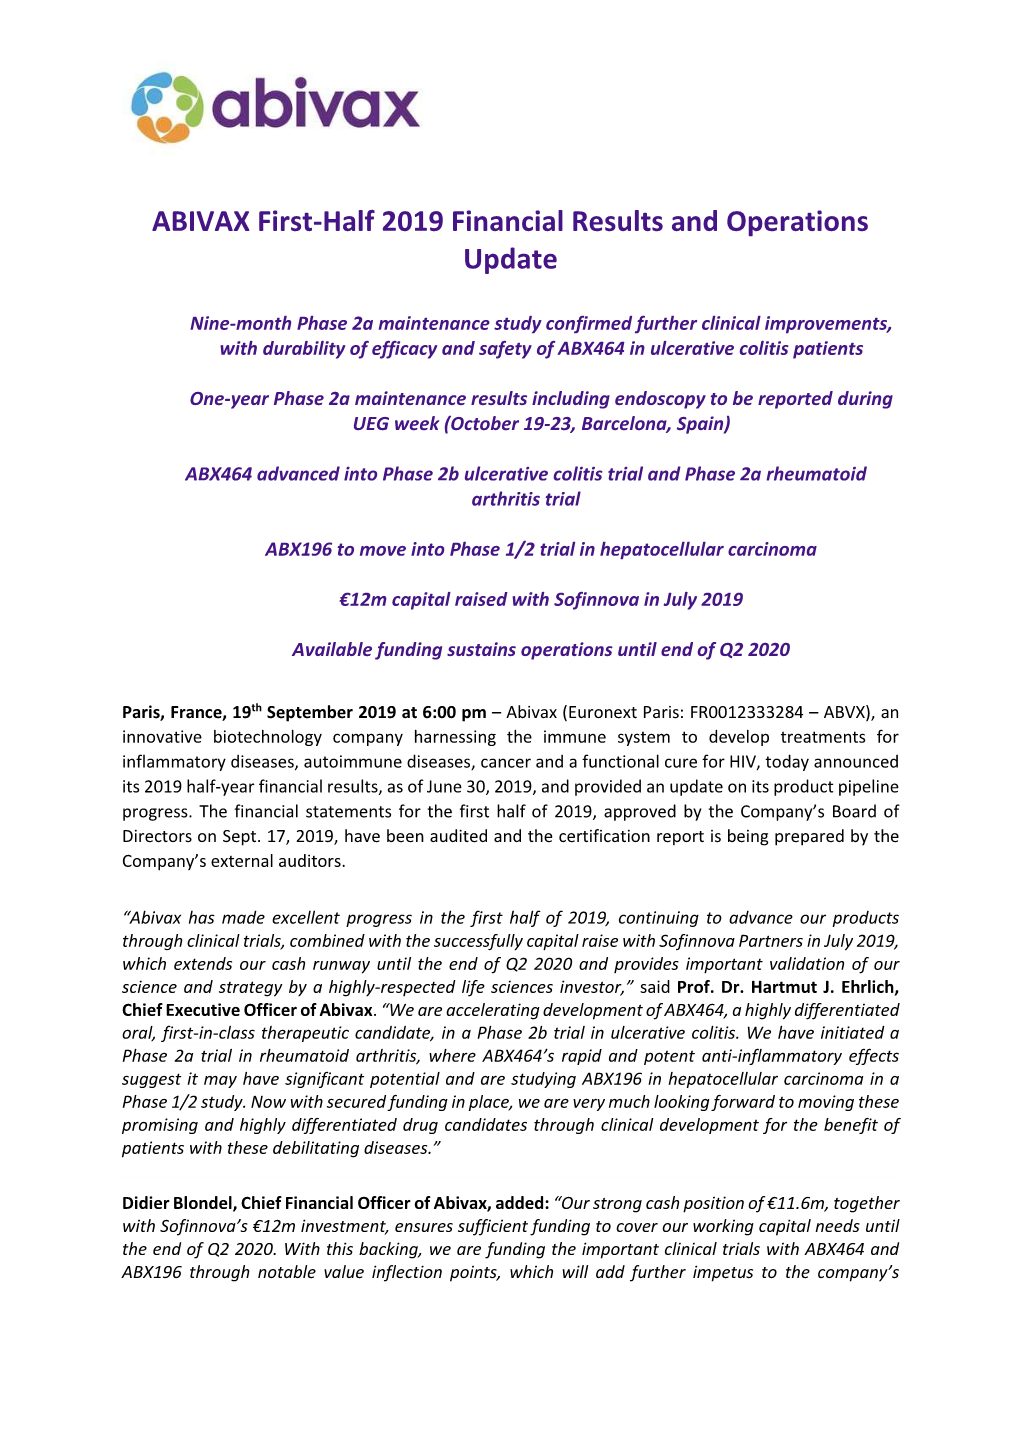 ABIVAX First-Half 2019 Financial Results and Operations Update